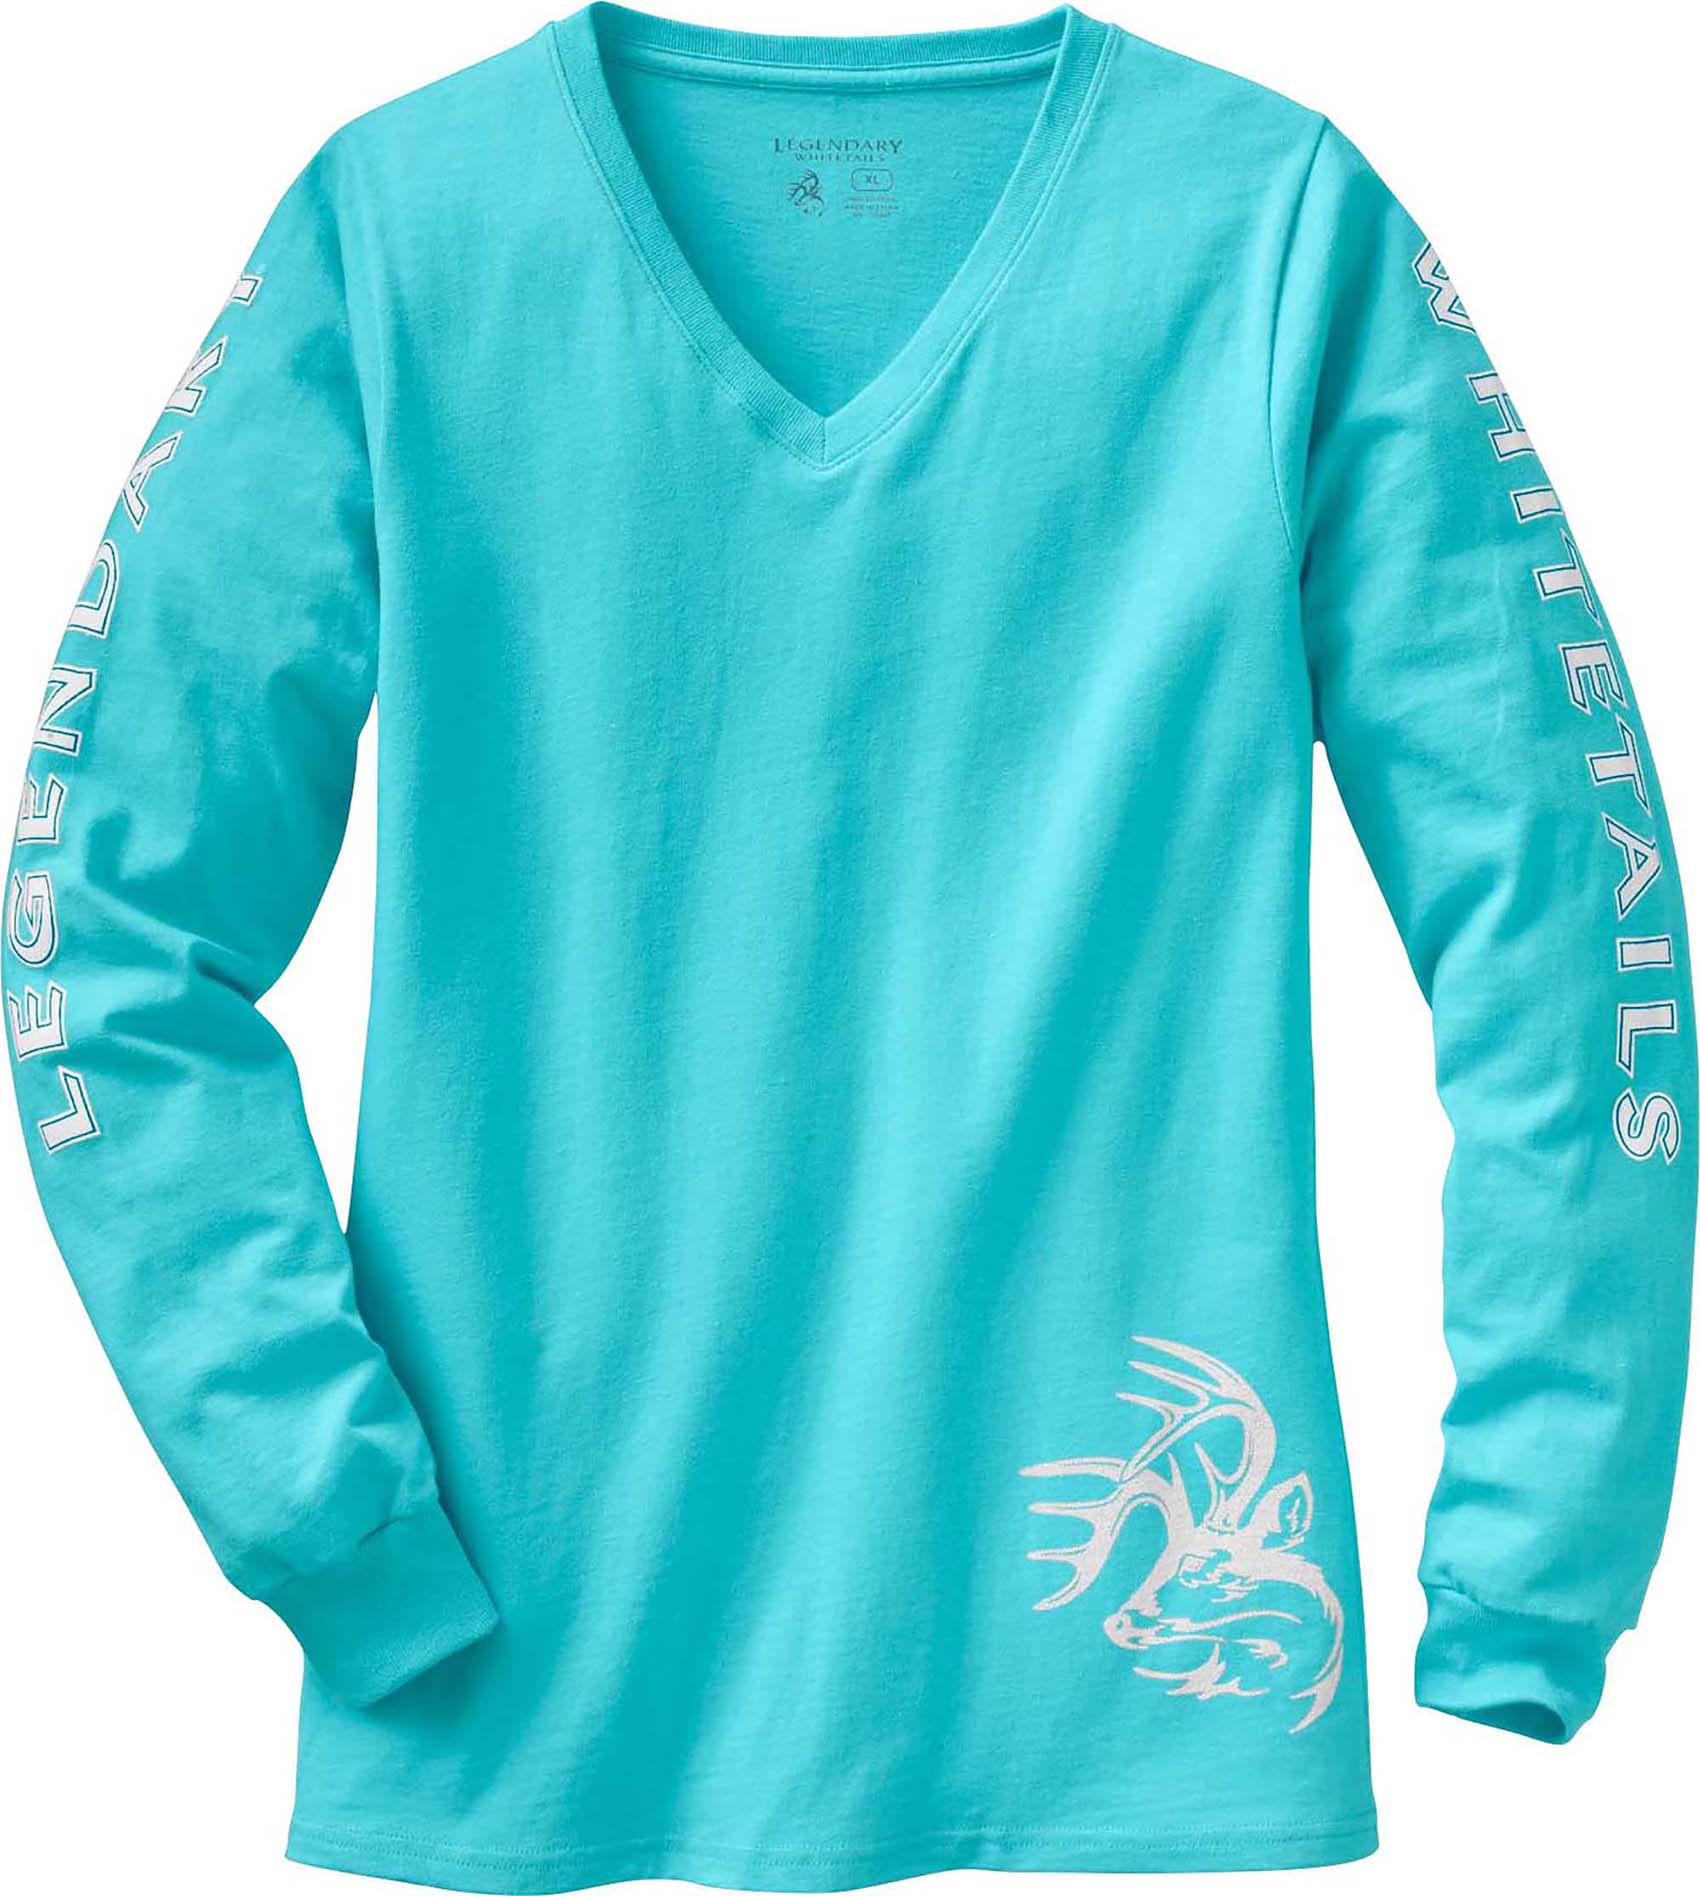 Women's Non-Typical Long Sleeve Tee | Legendary Whitetails